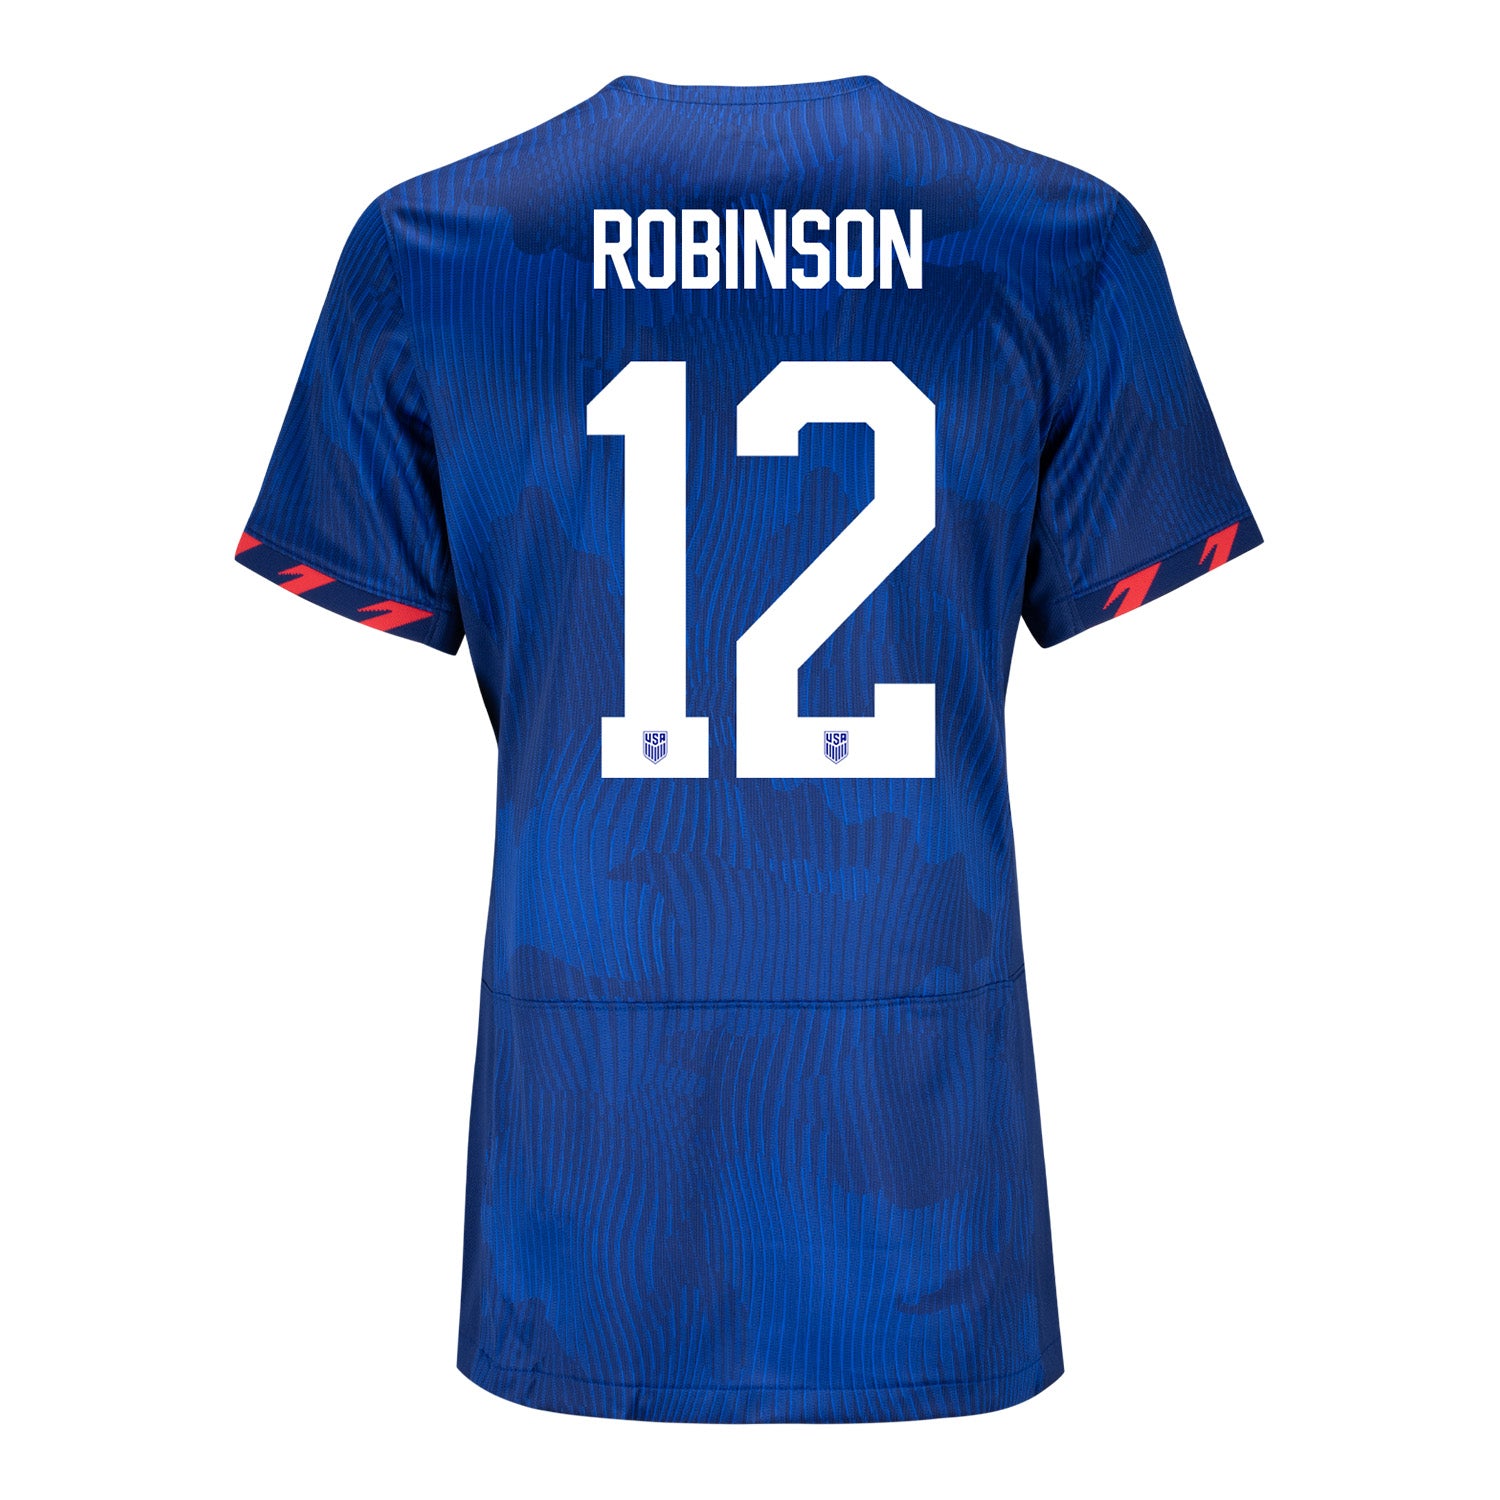 Women's Nike USMNT 2023 Personalized Away Match Jersey in Blue - Back View